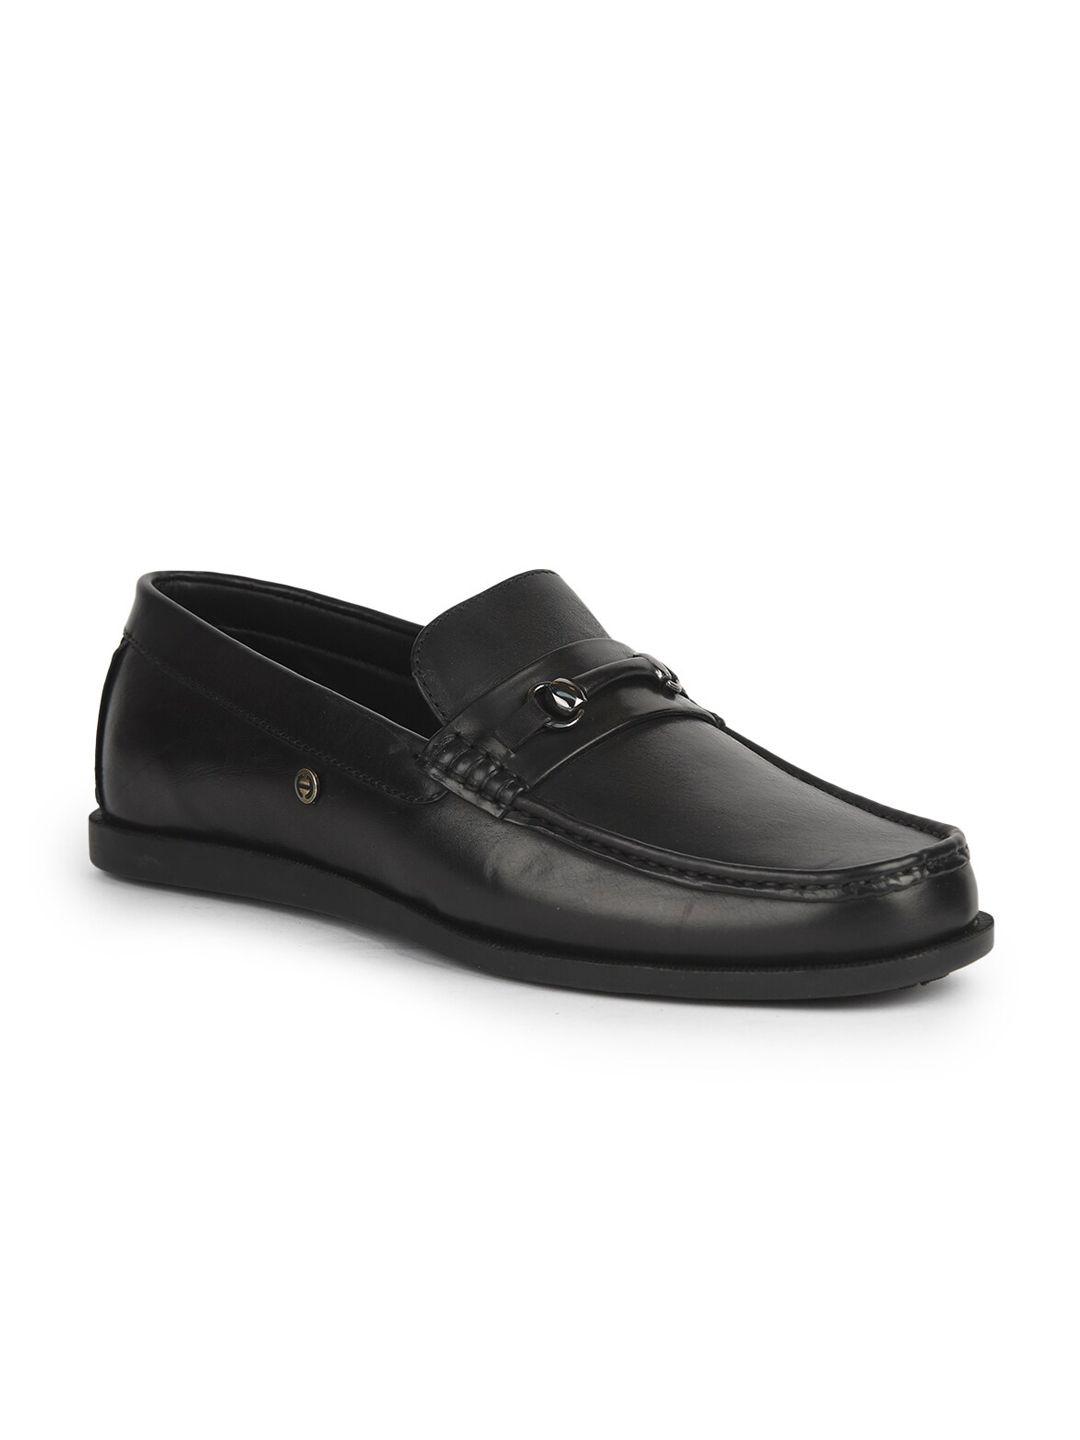 liberty men black solid  leather formal loafers